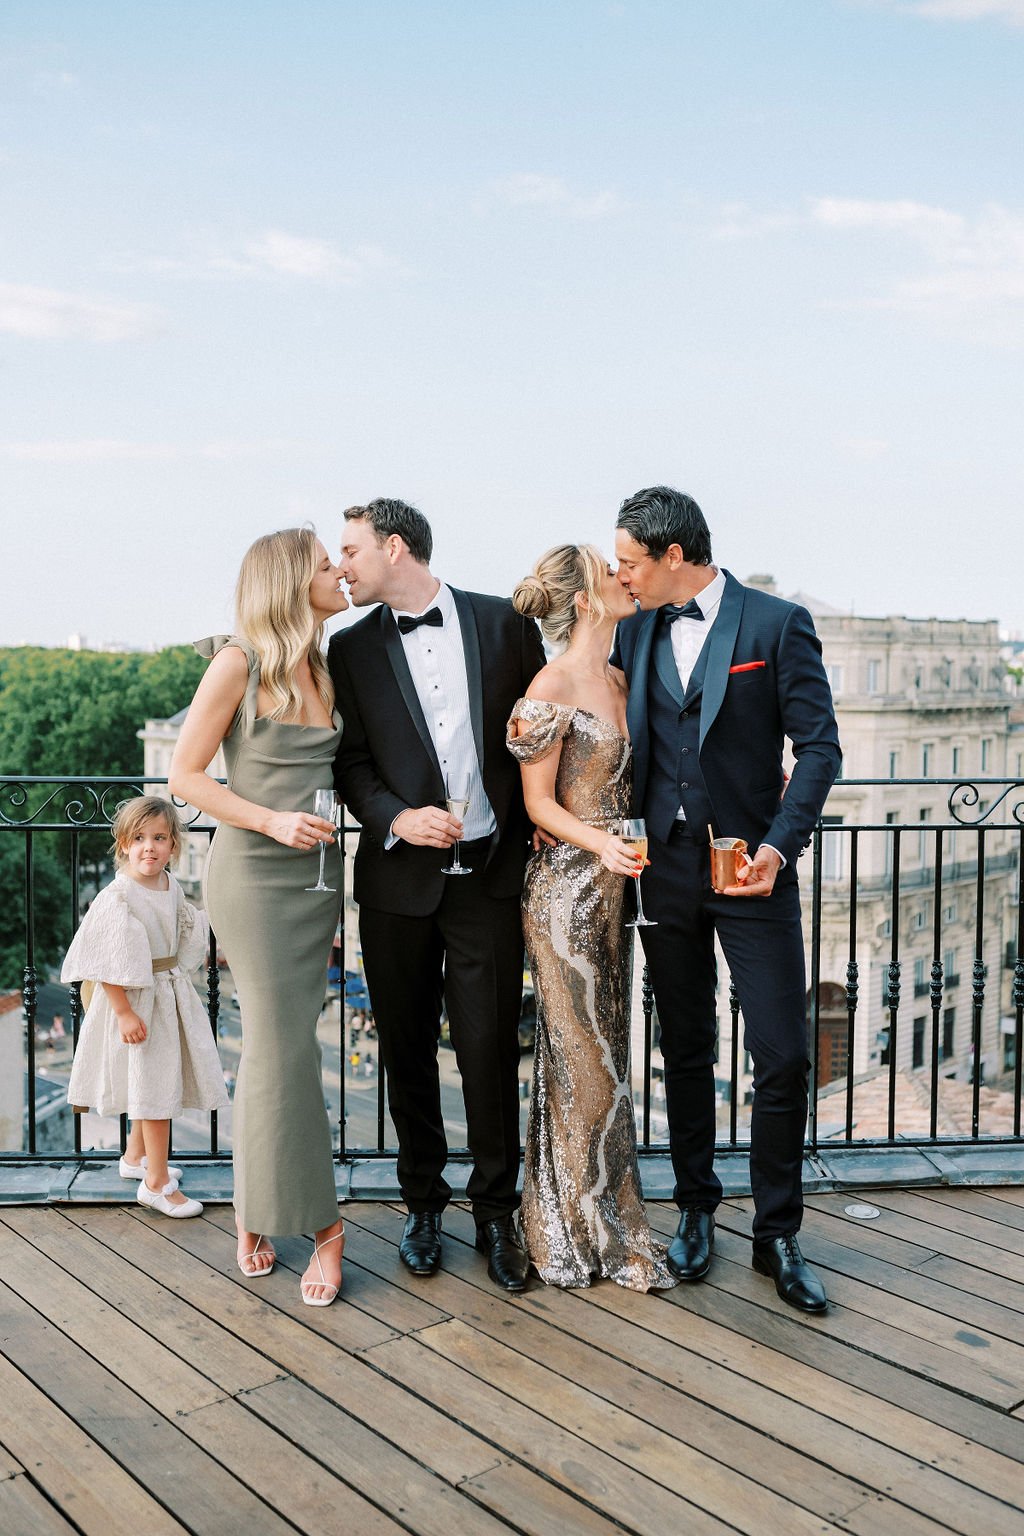 Romantic and cute photo ideas for French destination wedding